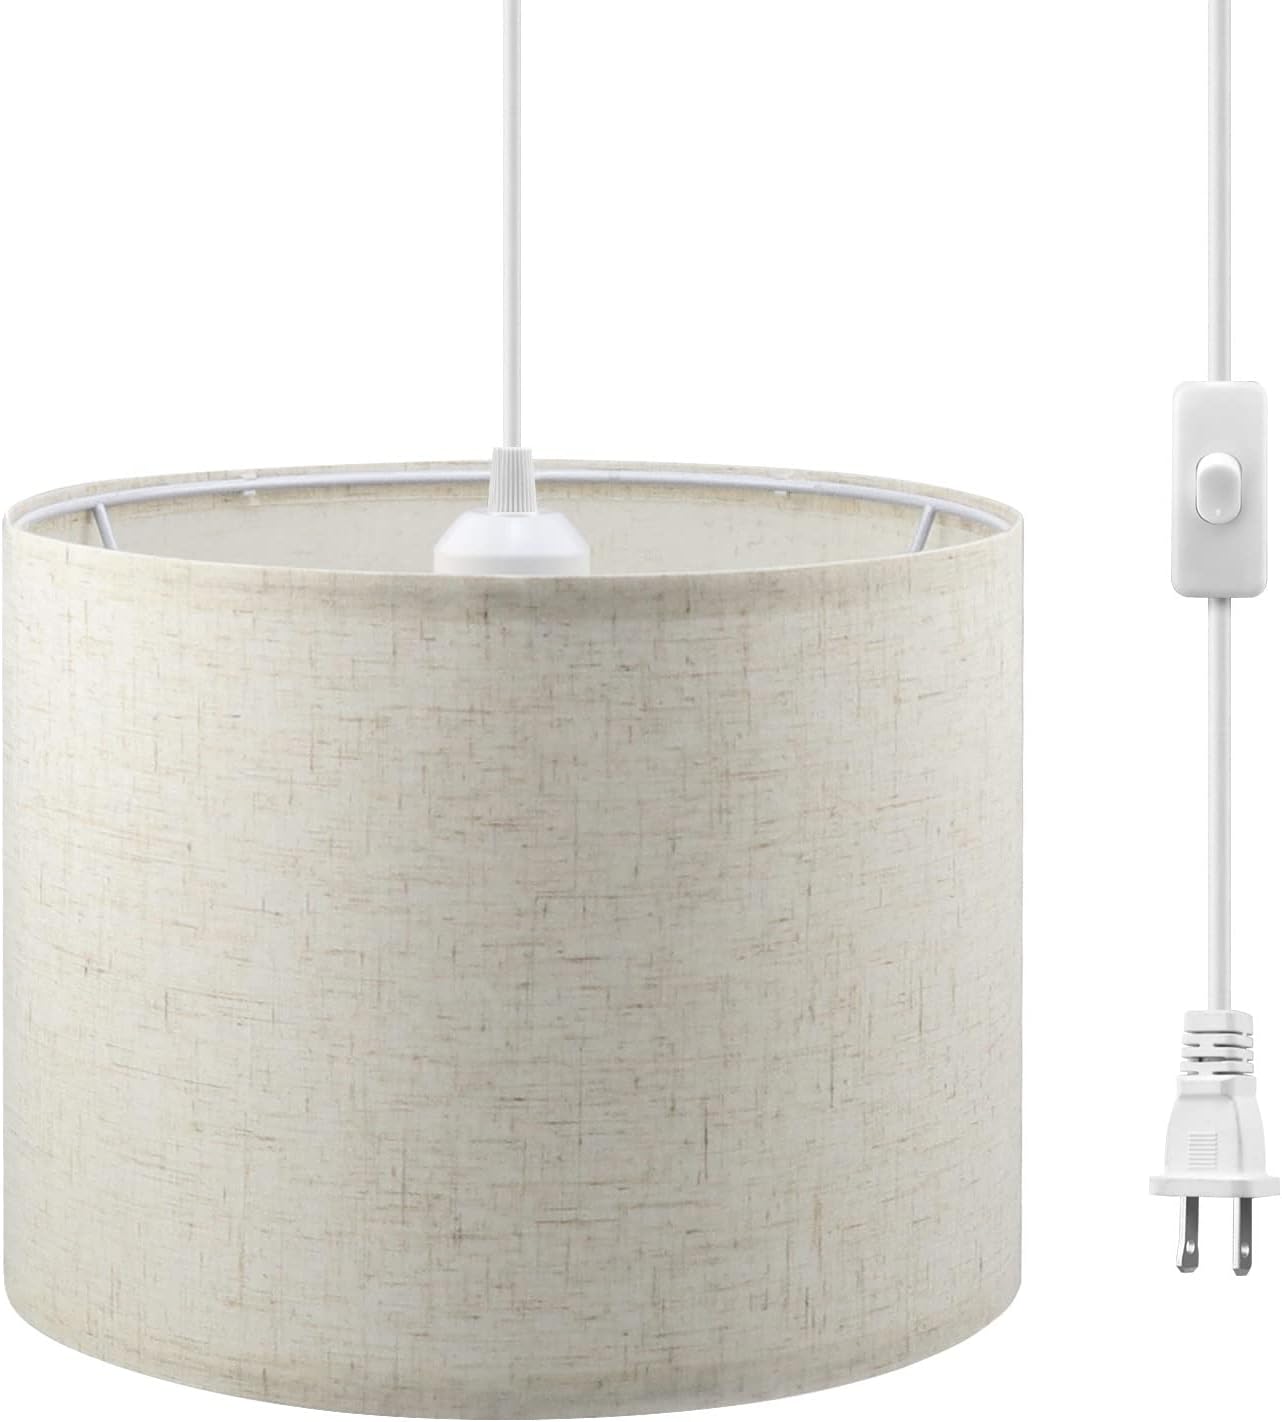 KUAUGST Plug in Hanging Light Review: A Stylish and Convenient Lighting Solution